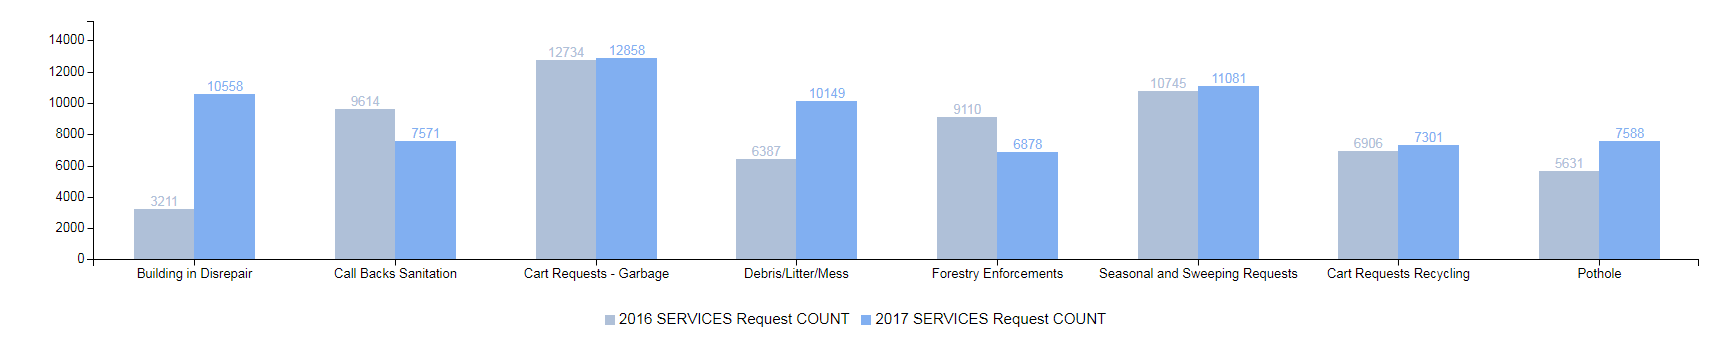 service-request-comparisons-2016-and-2017